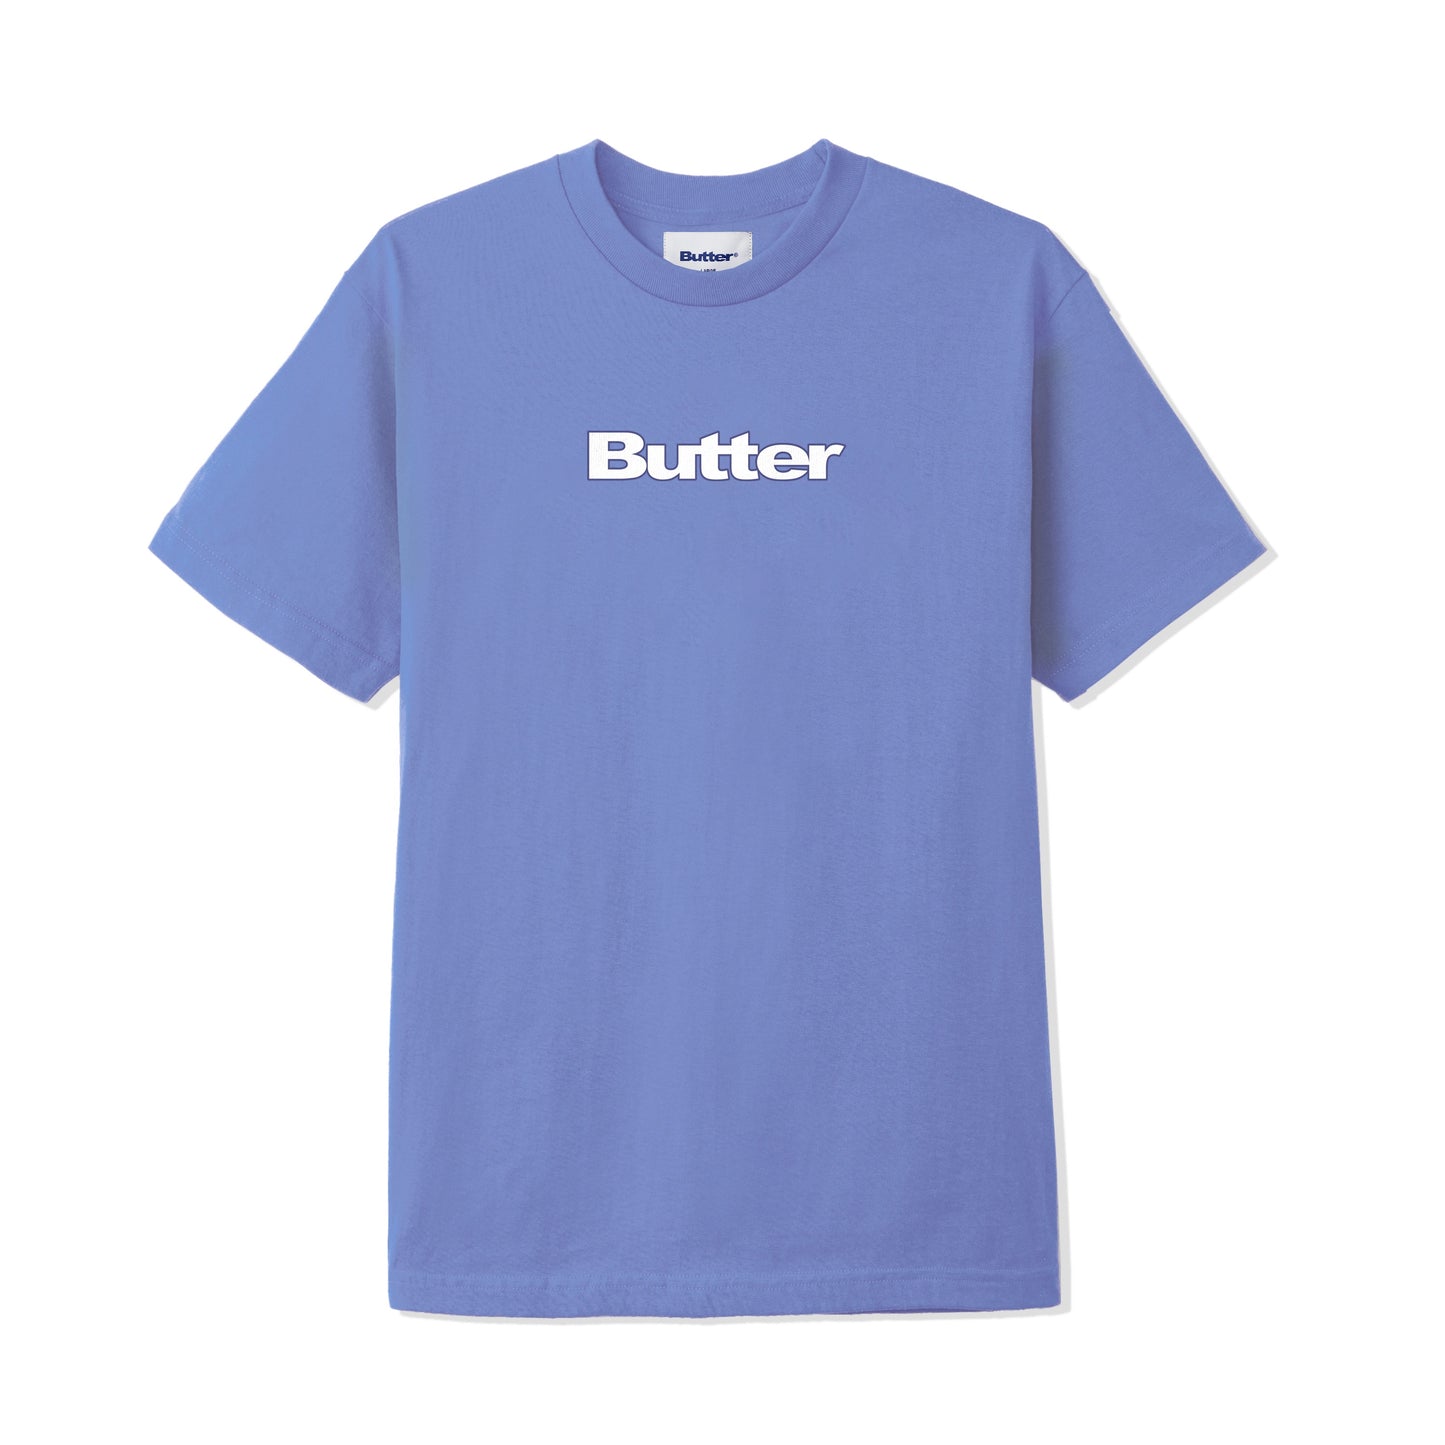 Butter x Disney Sight And Sound T-shirt Periwinkle